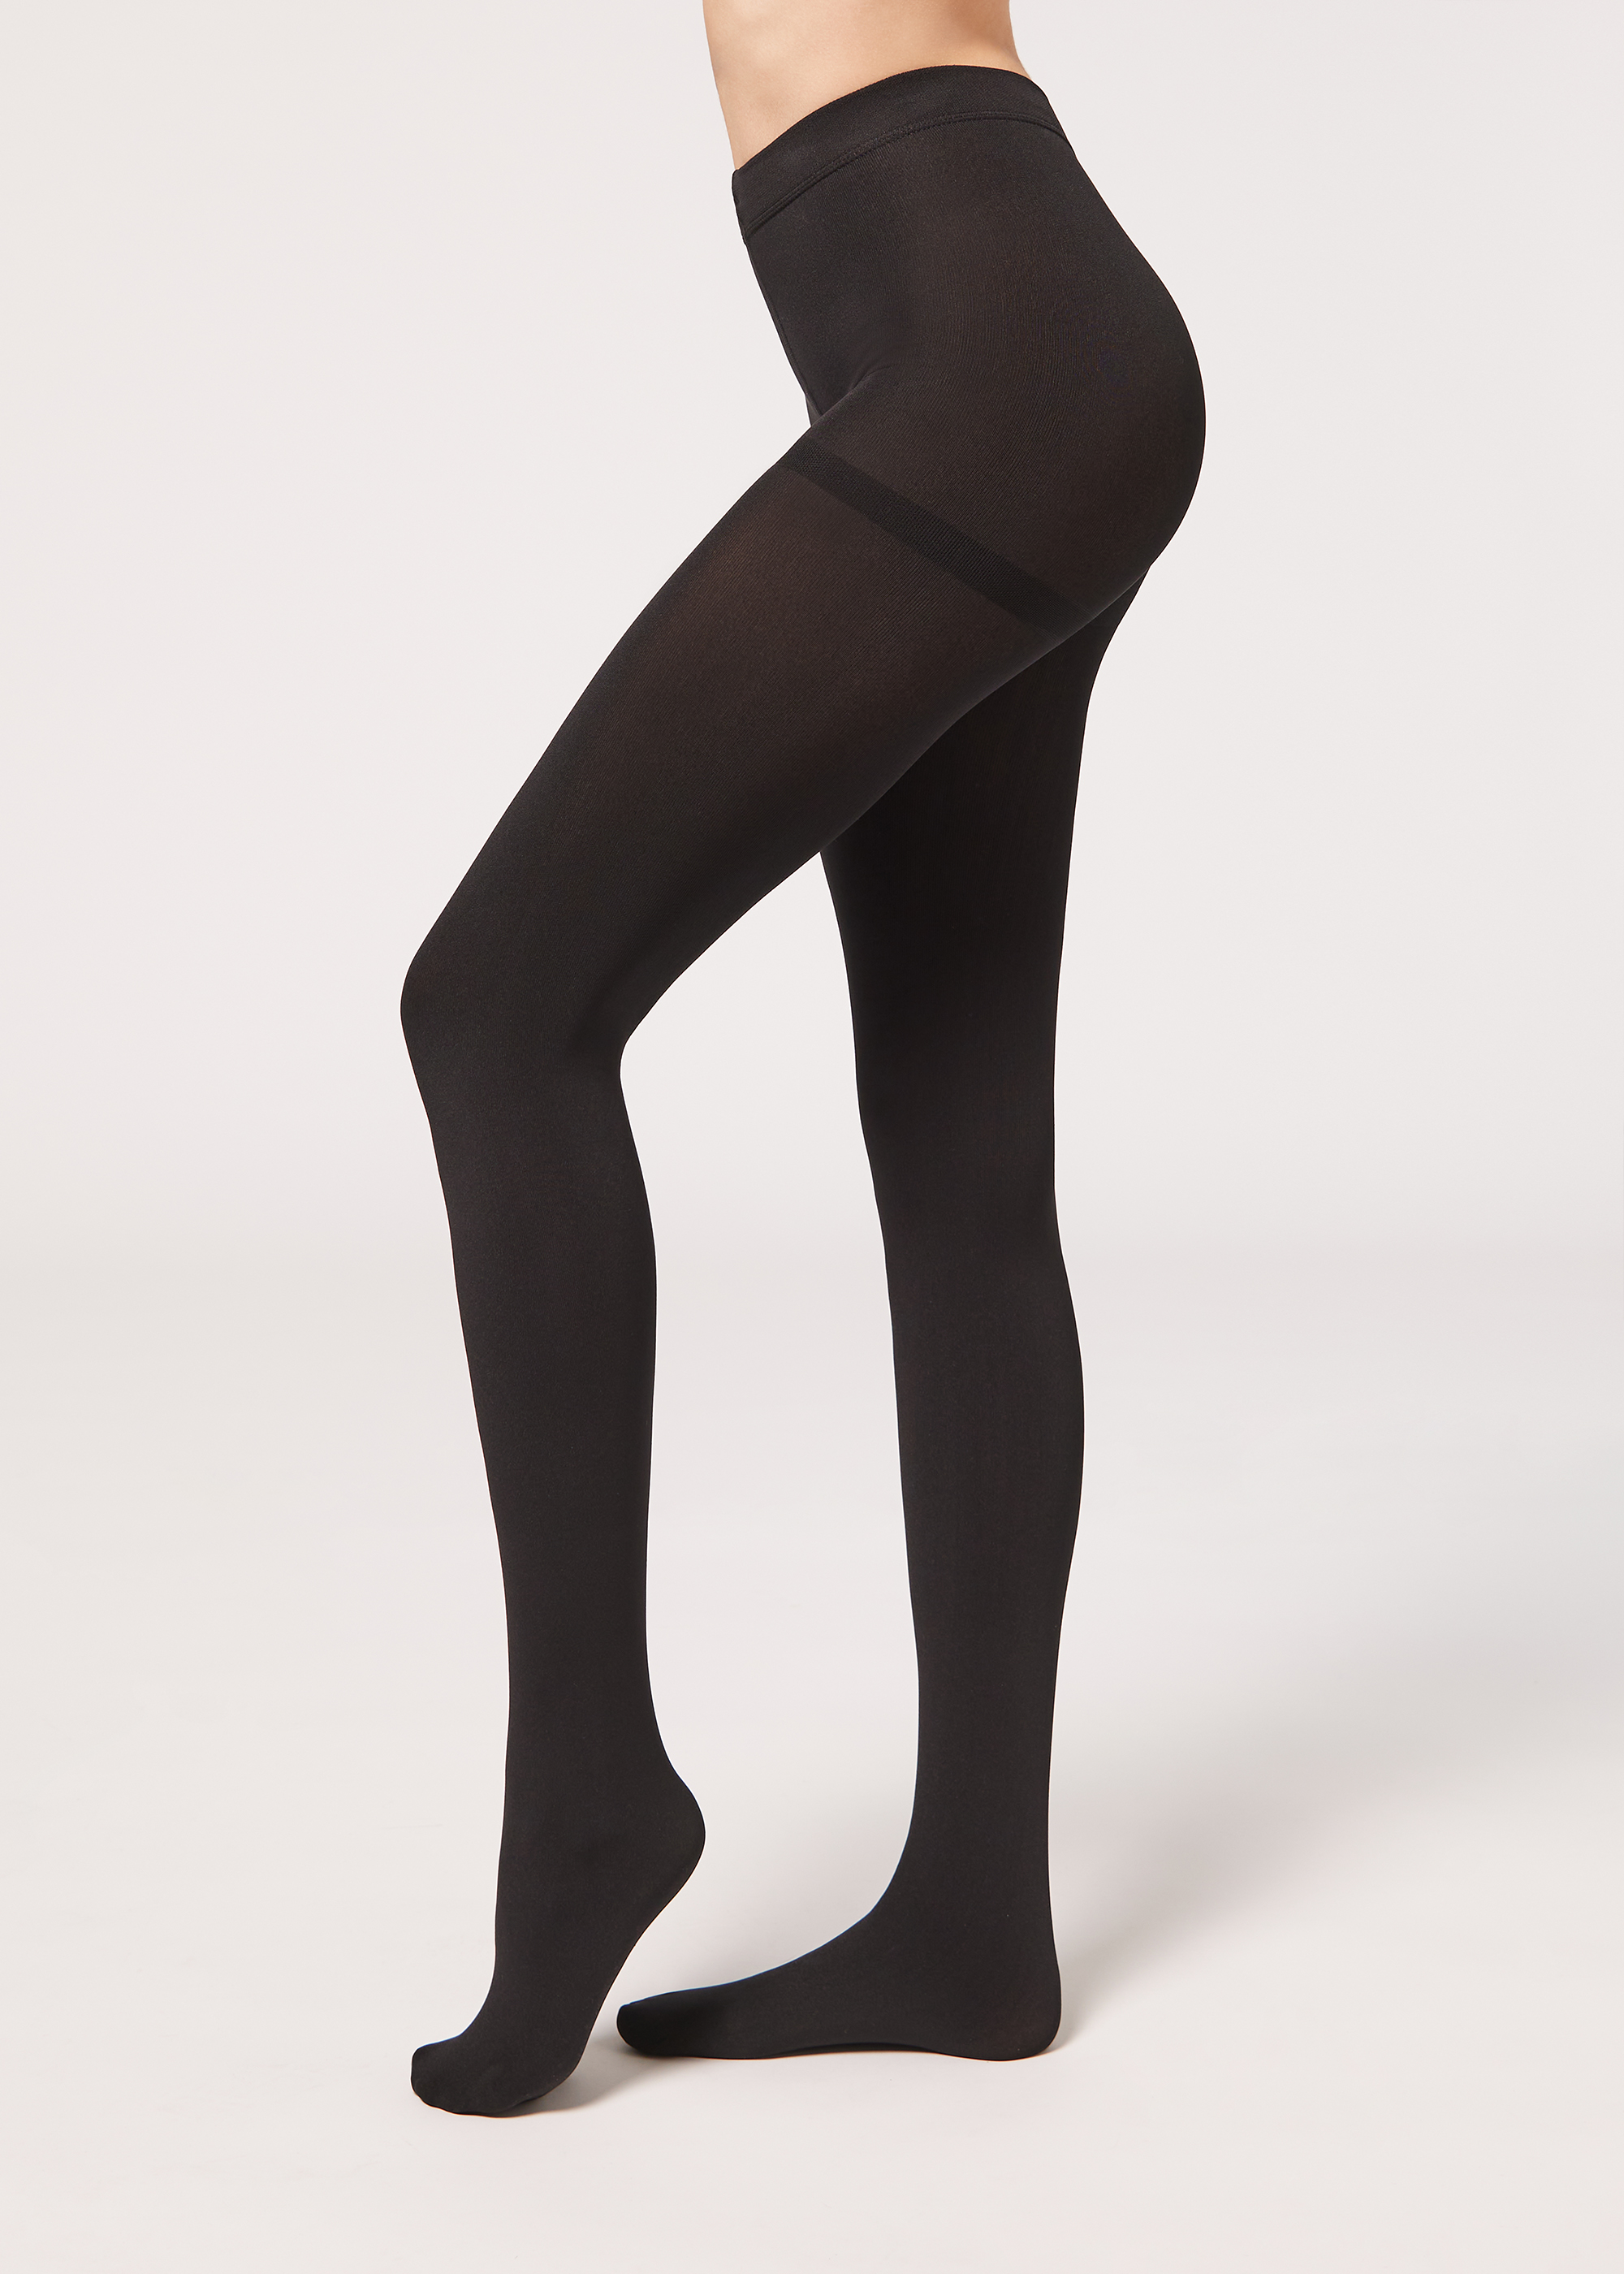 High Waisted Leggings Translucent Nude Tights Winter Polyester